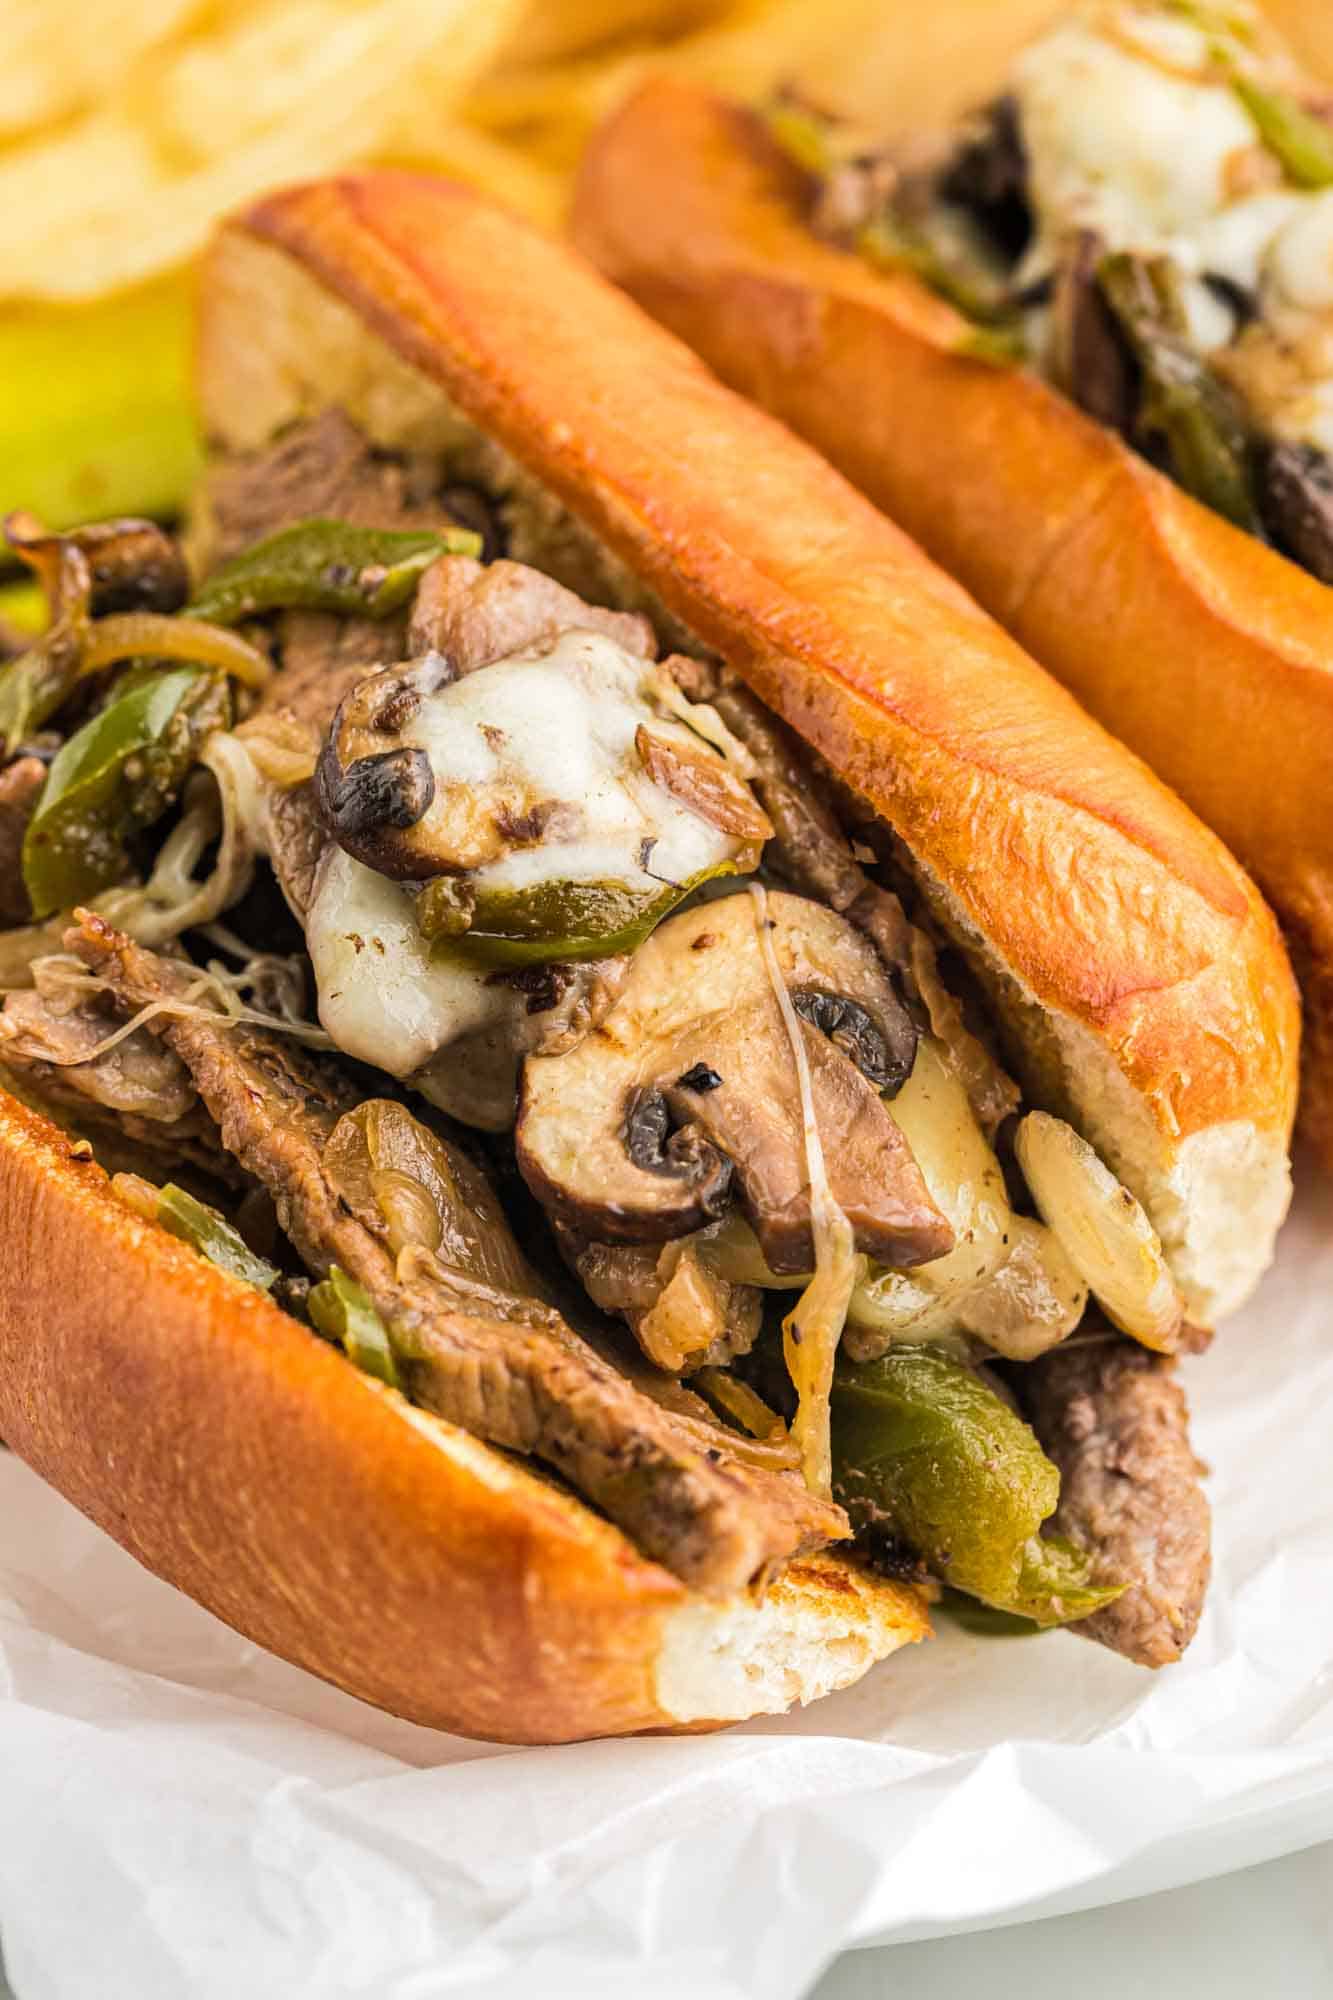 Philly cheesesteak sandwiches served on a plate